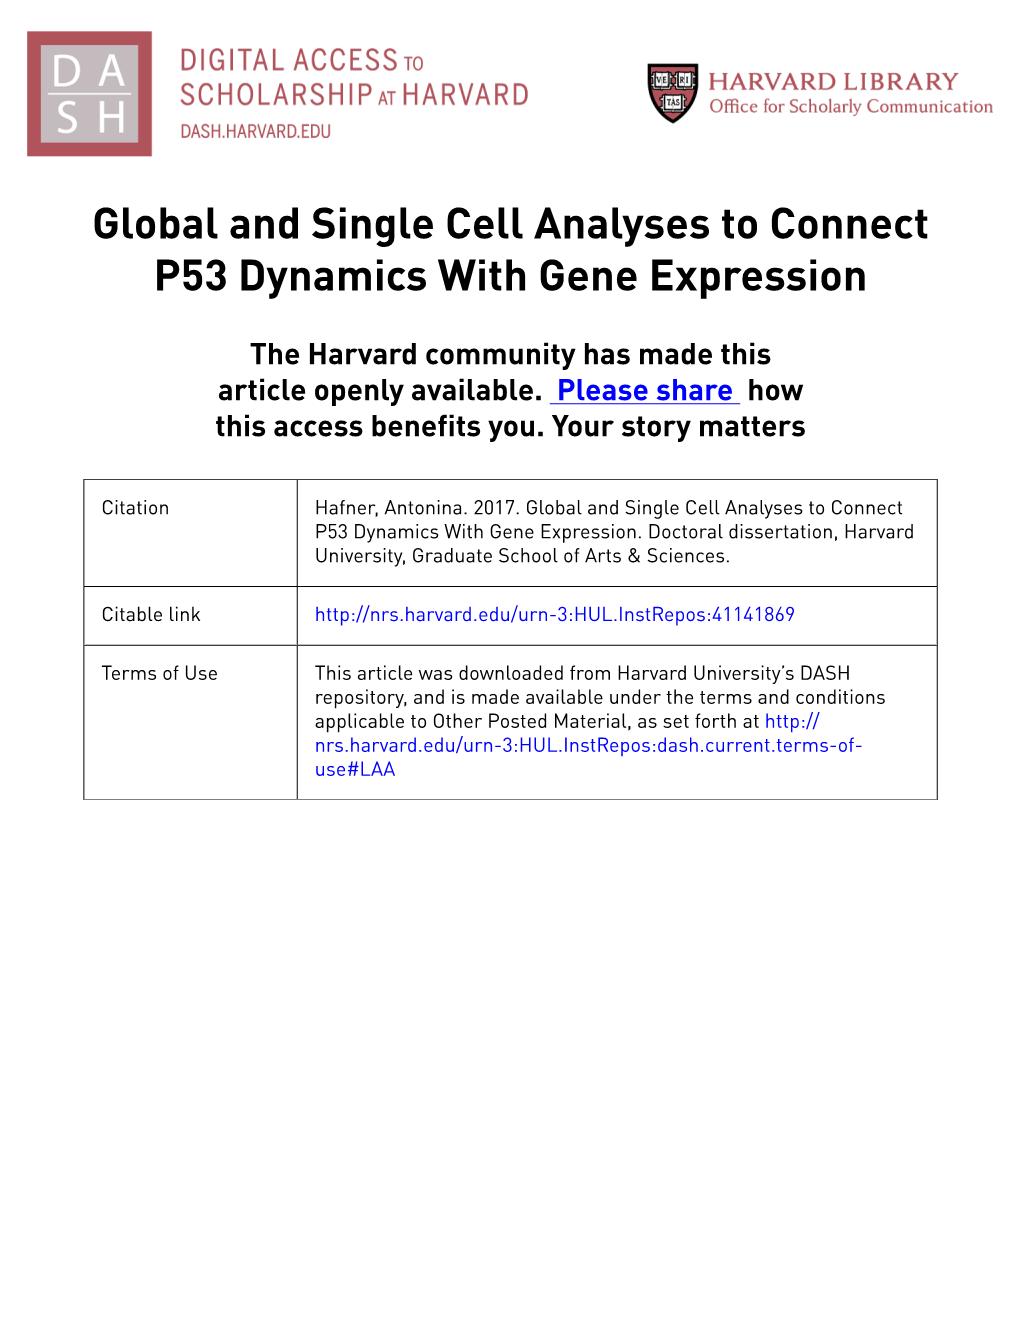 Global and Single Cell Analyses to Connect P53 Dynamics with Gene Expression